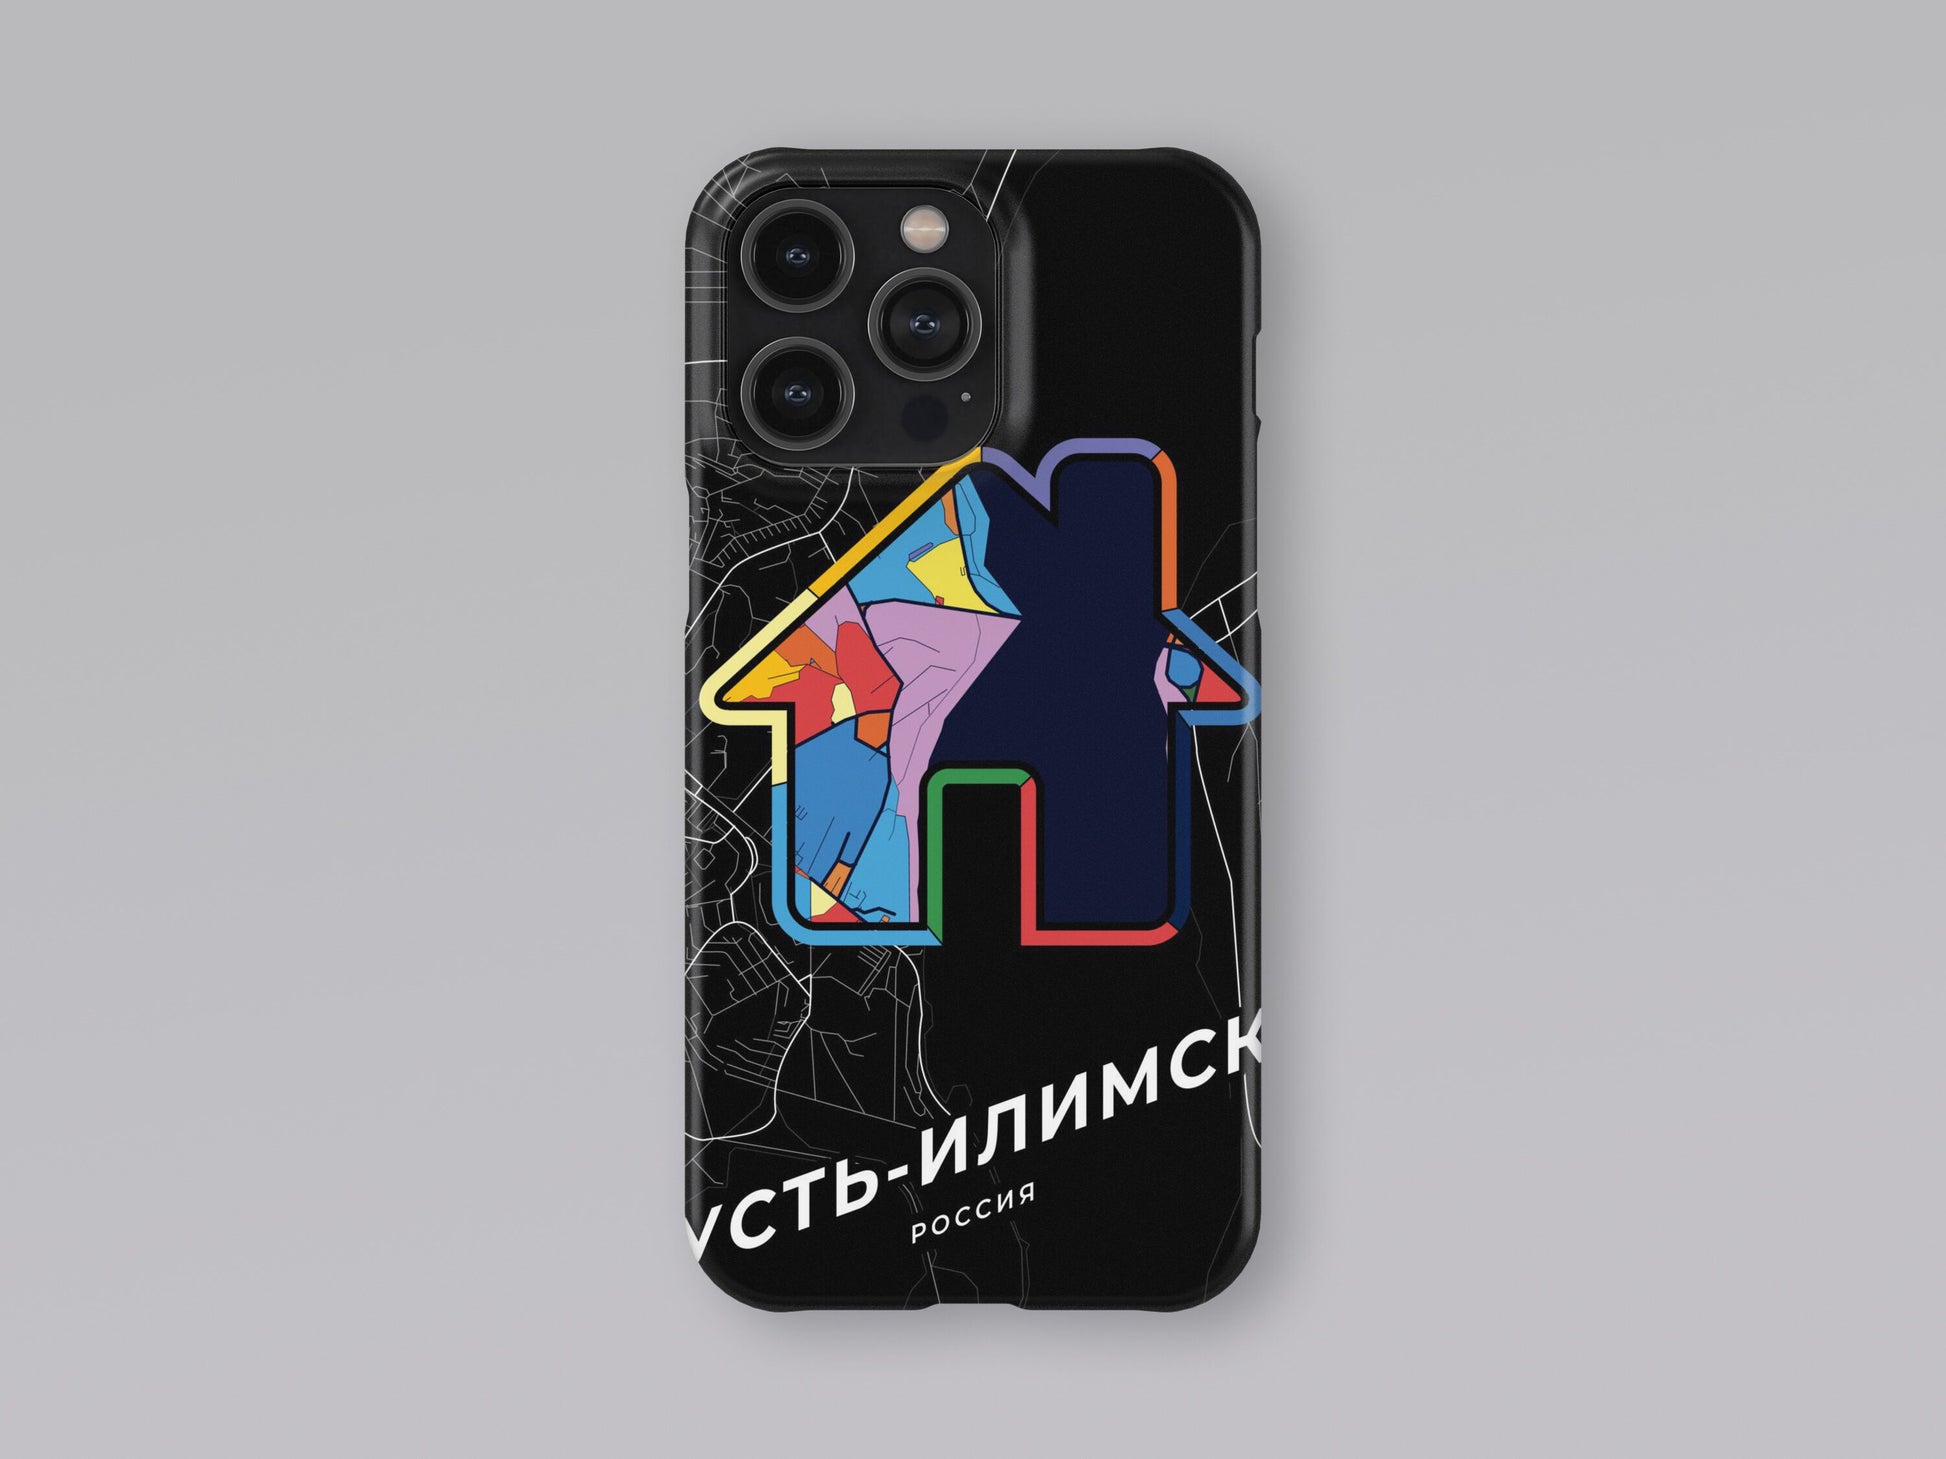 Ust-Ilimsk Russia slim phone case with colorful icon 3